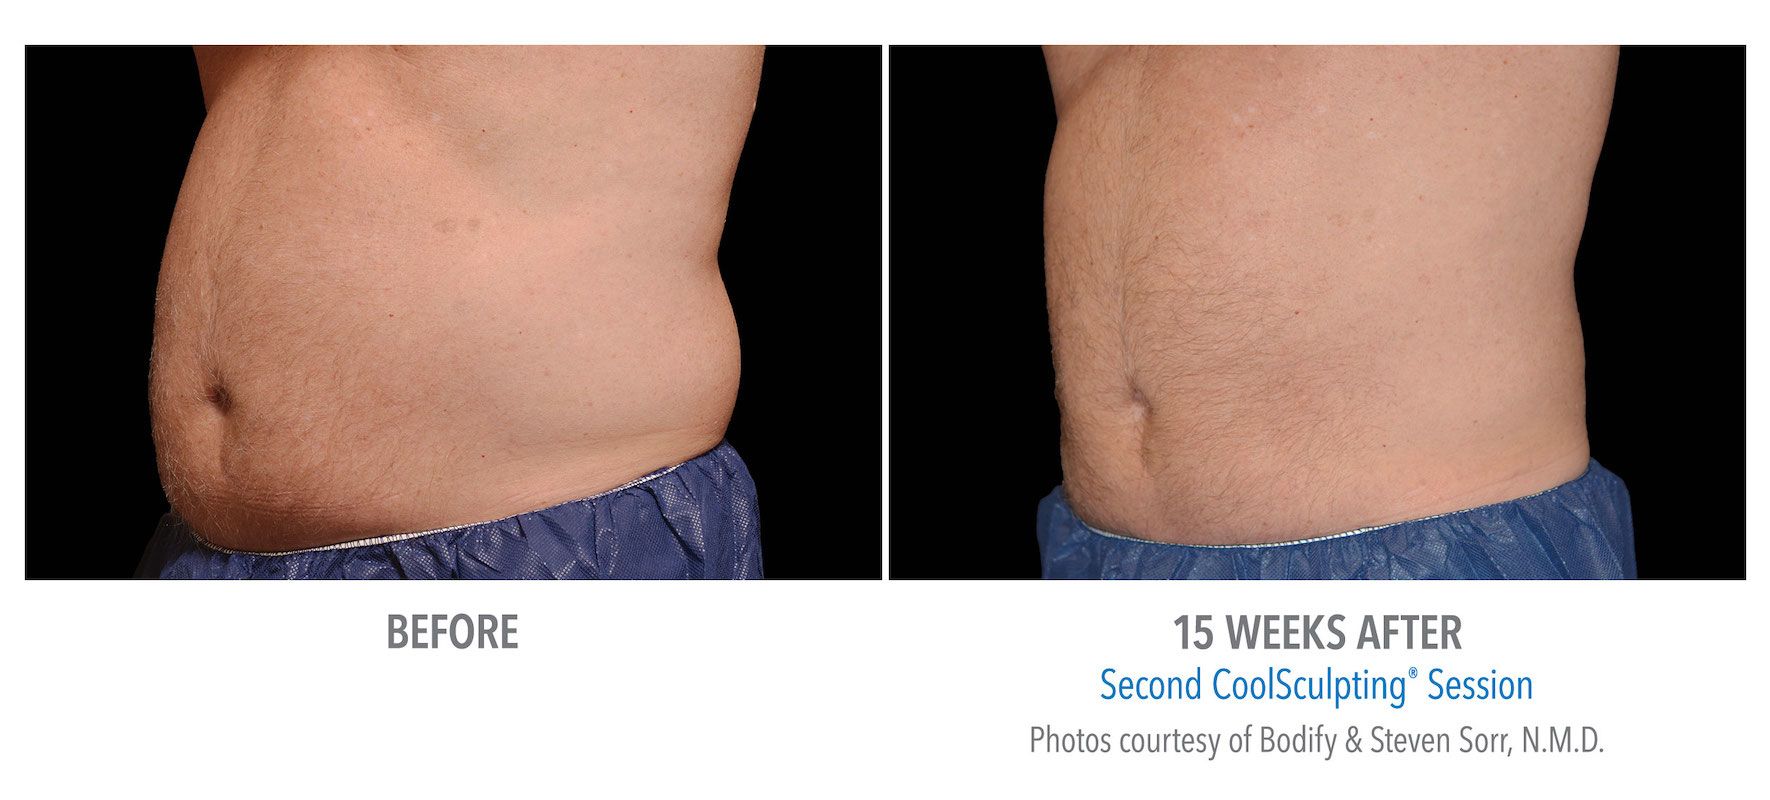 Male CoolSculpting patient in Las Vegas. Before and after photo of abdomen and flanks.